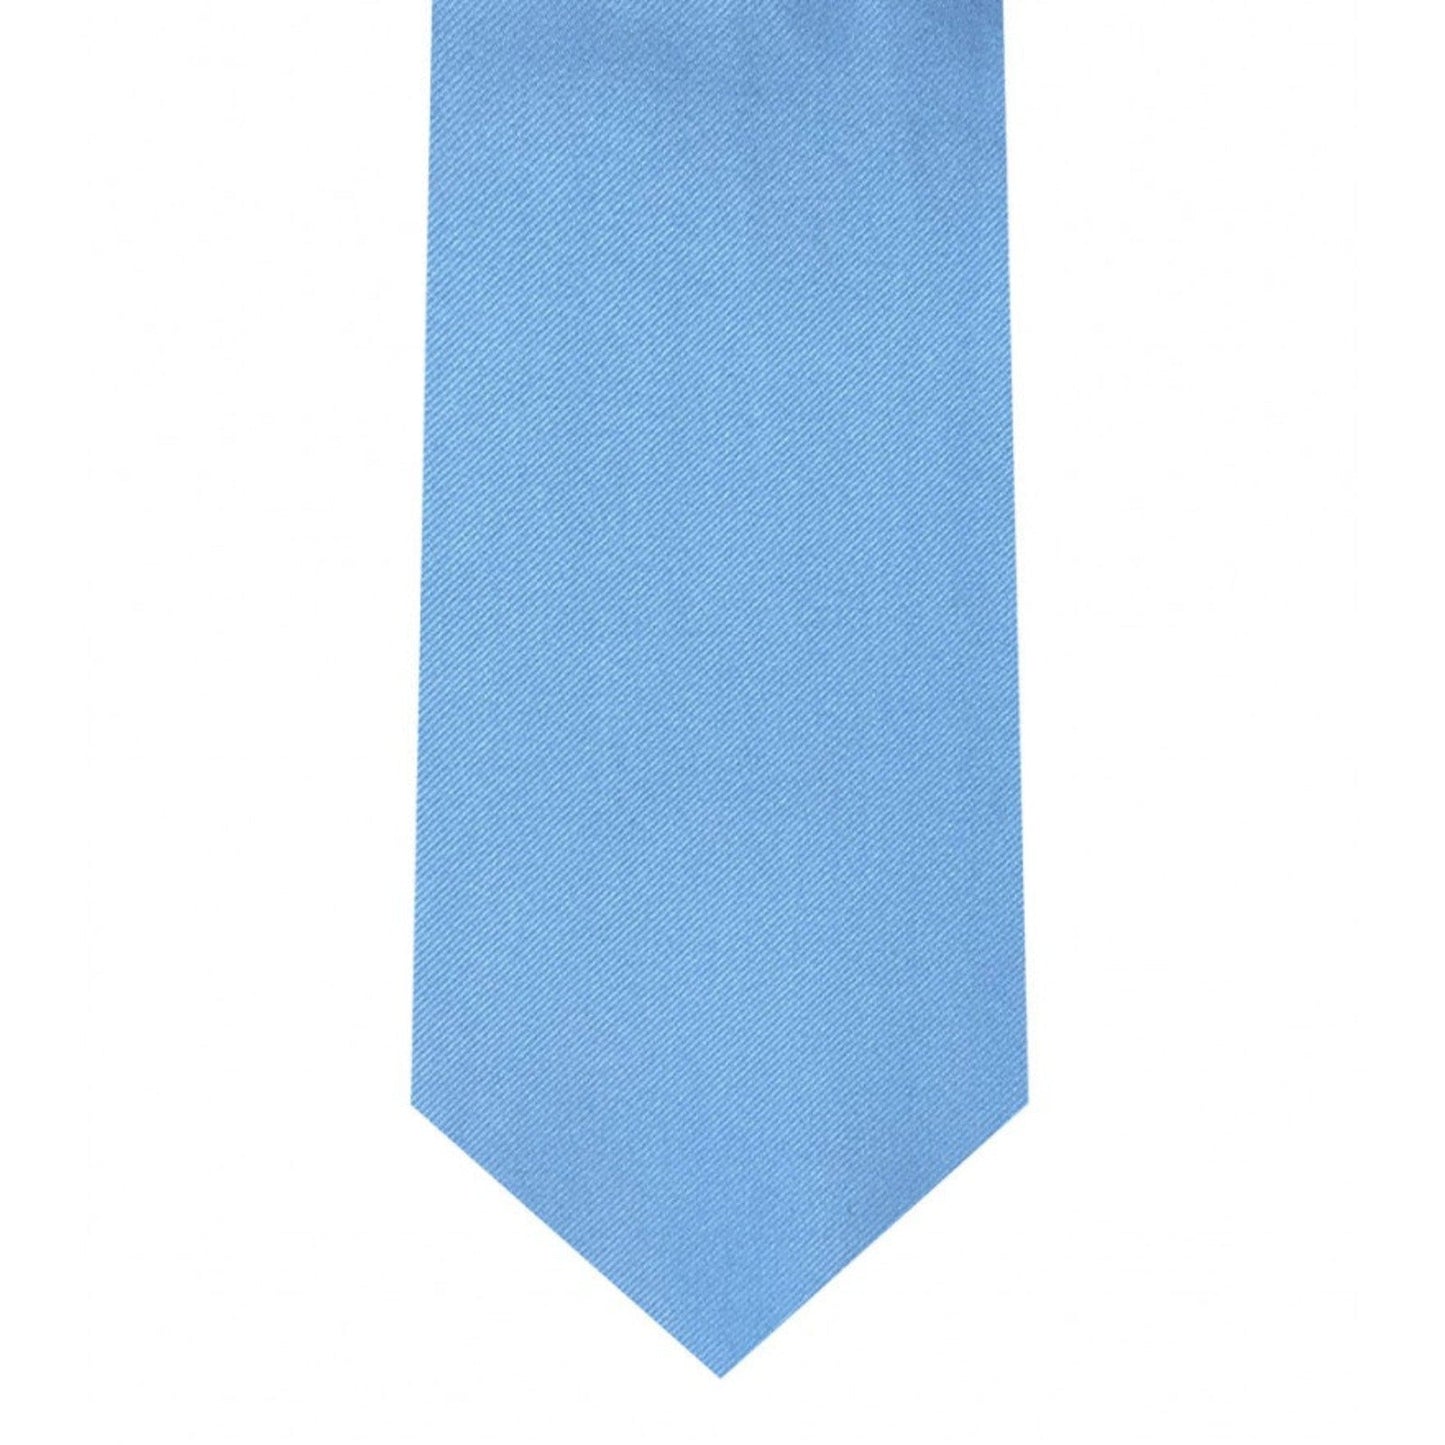 Classic Baby Blue Tie Skinny width 2.75 inches With Matching Pocket Square | KCT Menswear